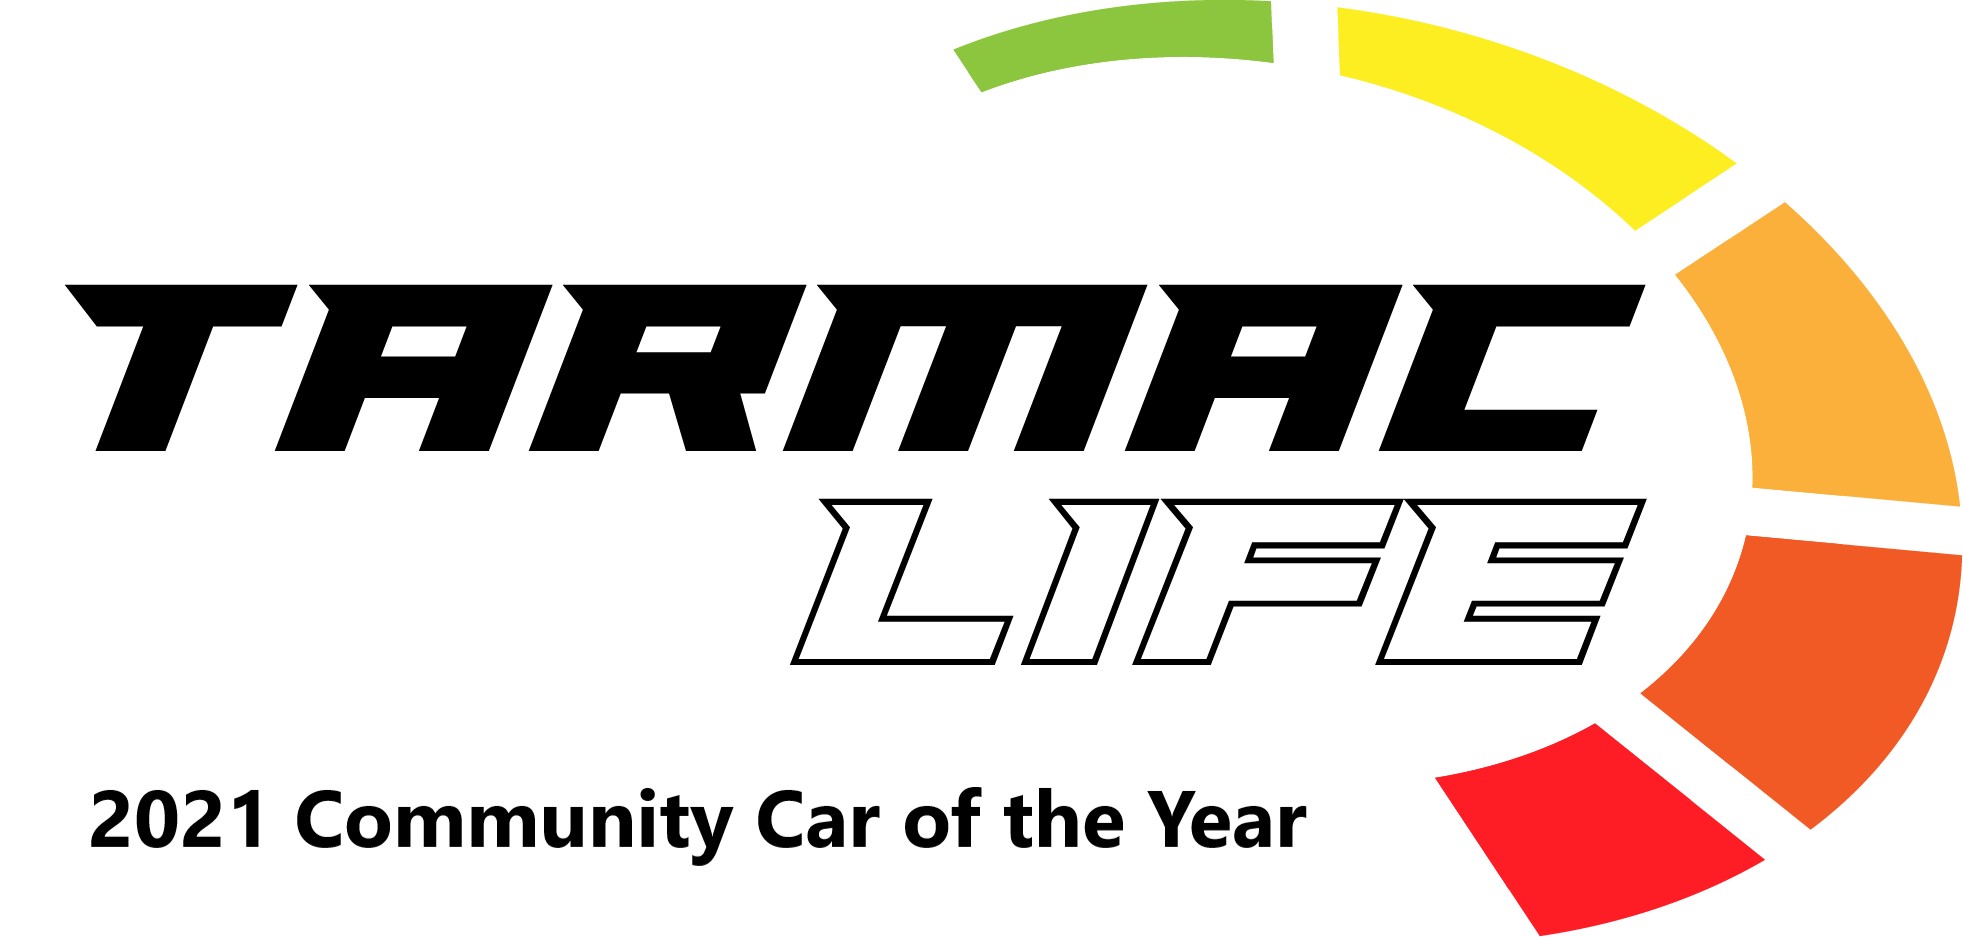 Community Car of the Year